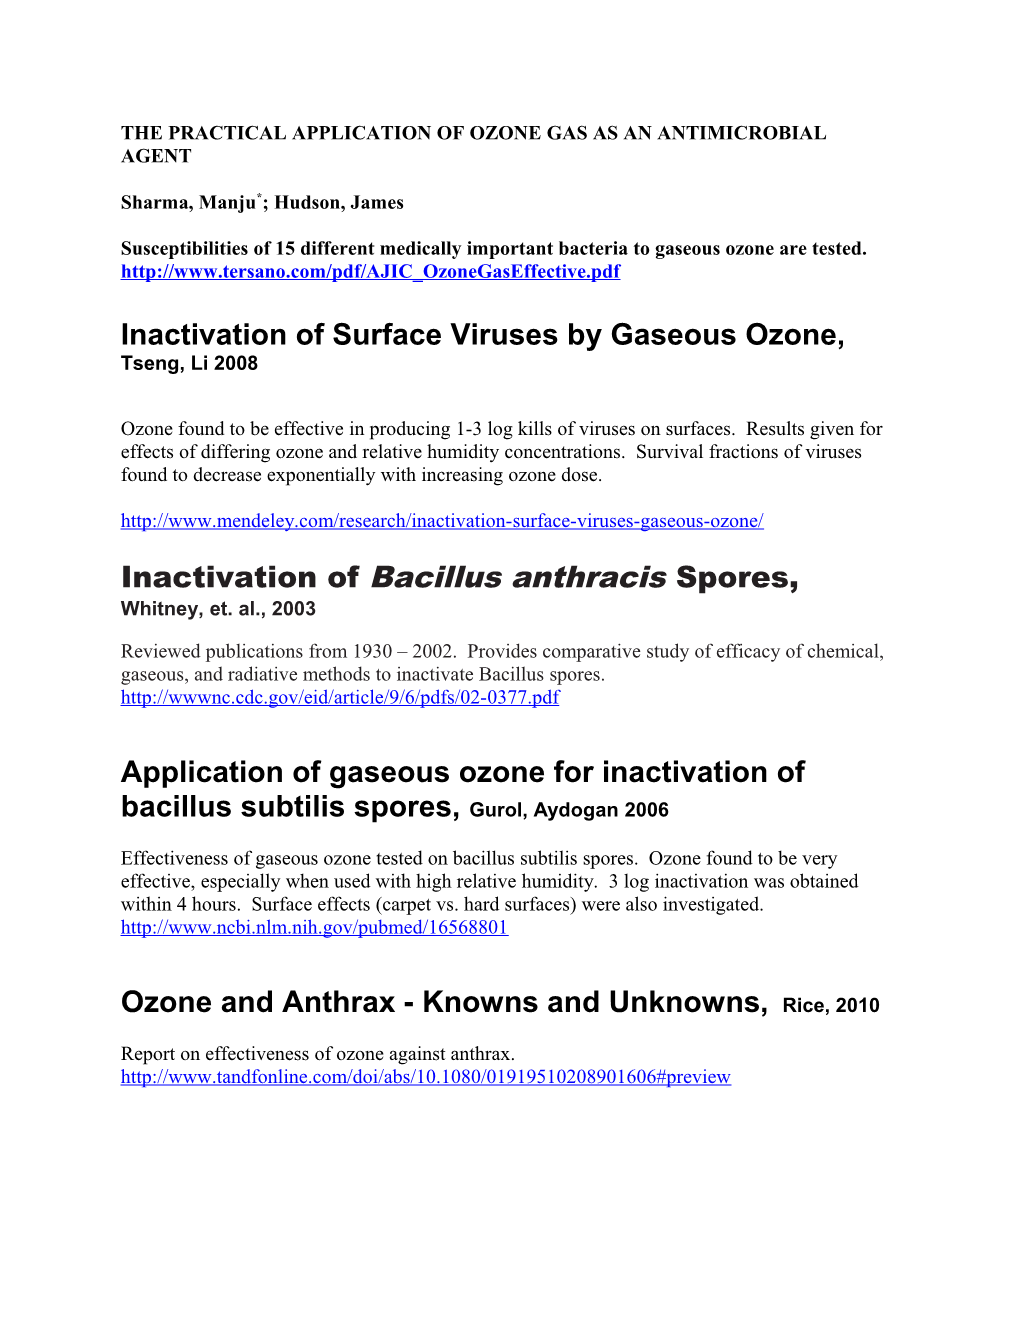 Inactivation of Surface Viruses by Gaseous Ozone, Tseng